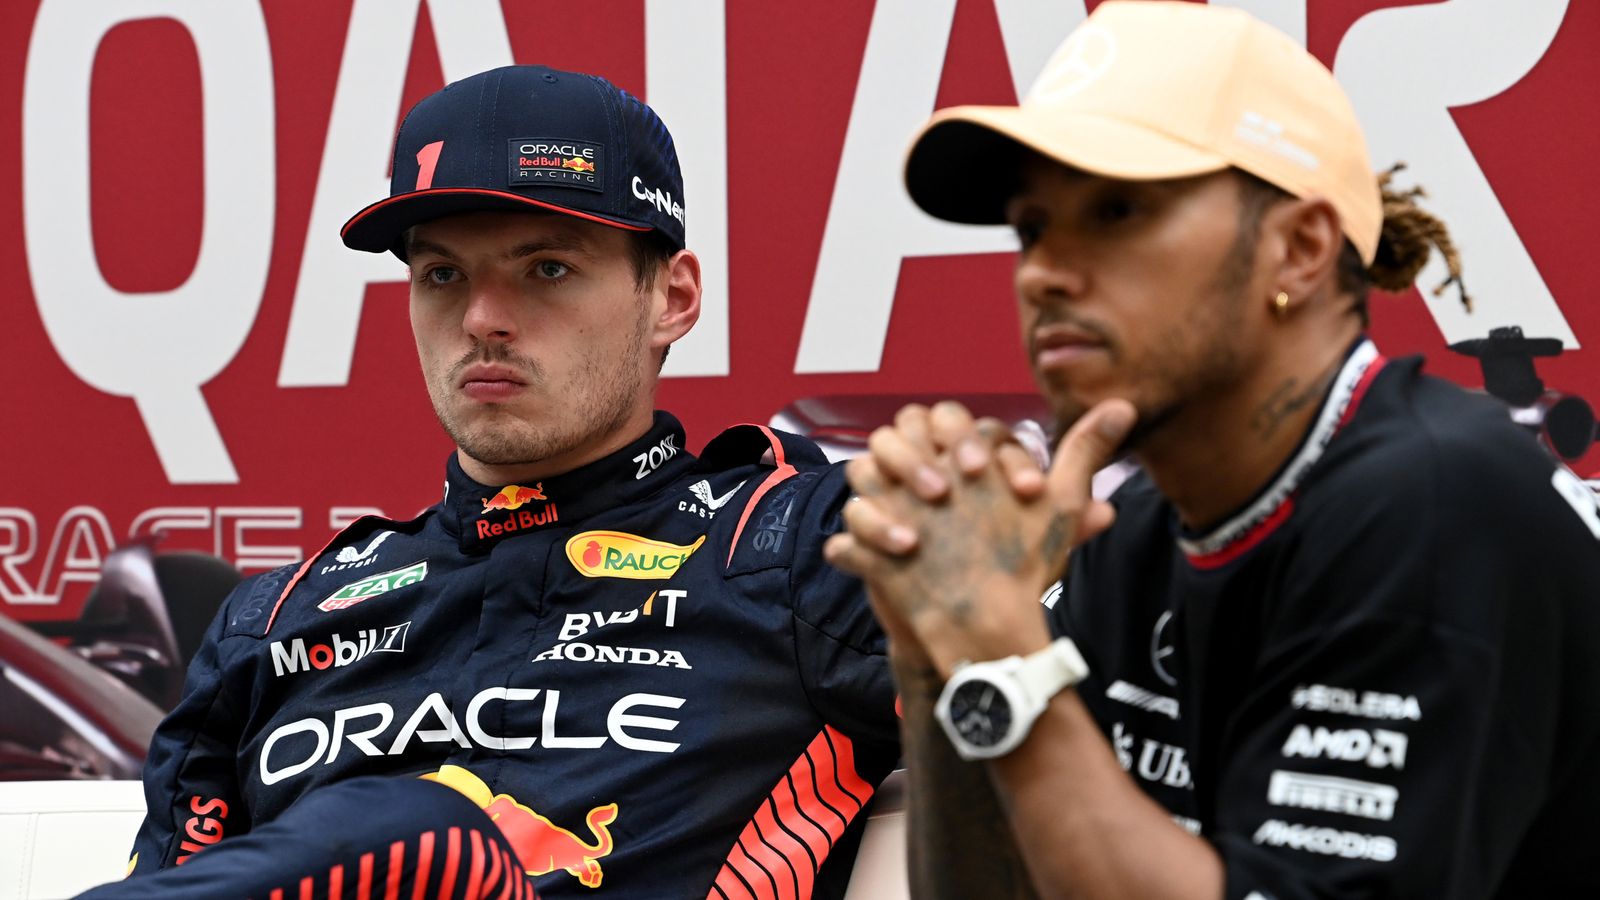 Verstappen faces Mercedes start threat as F1 wait on crucial tyre decision